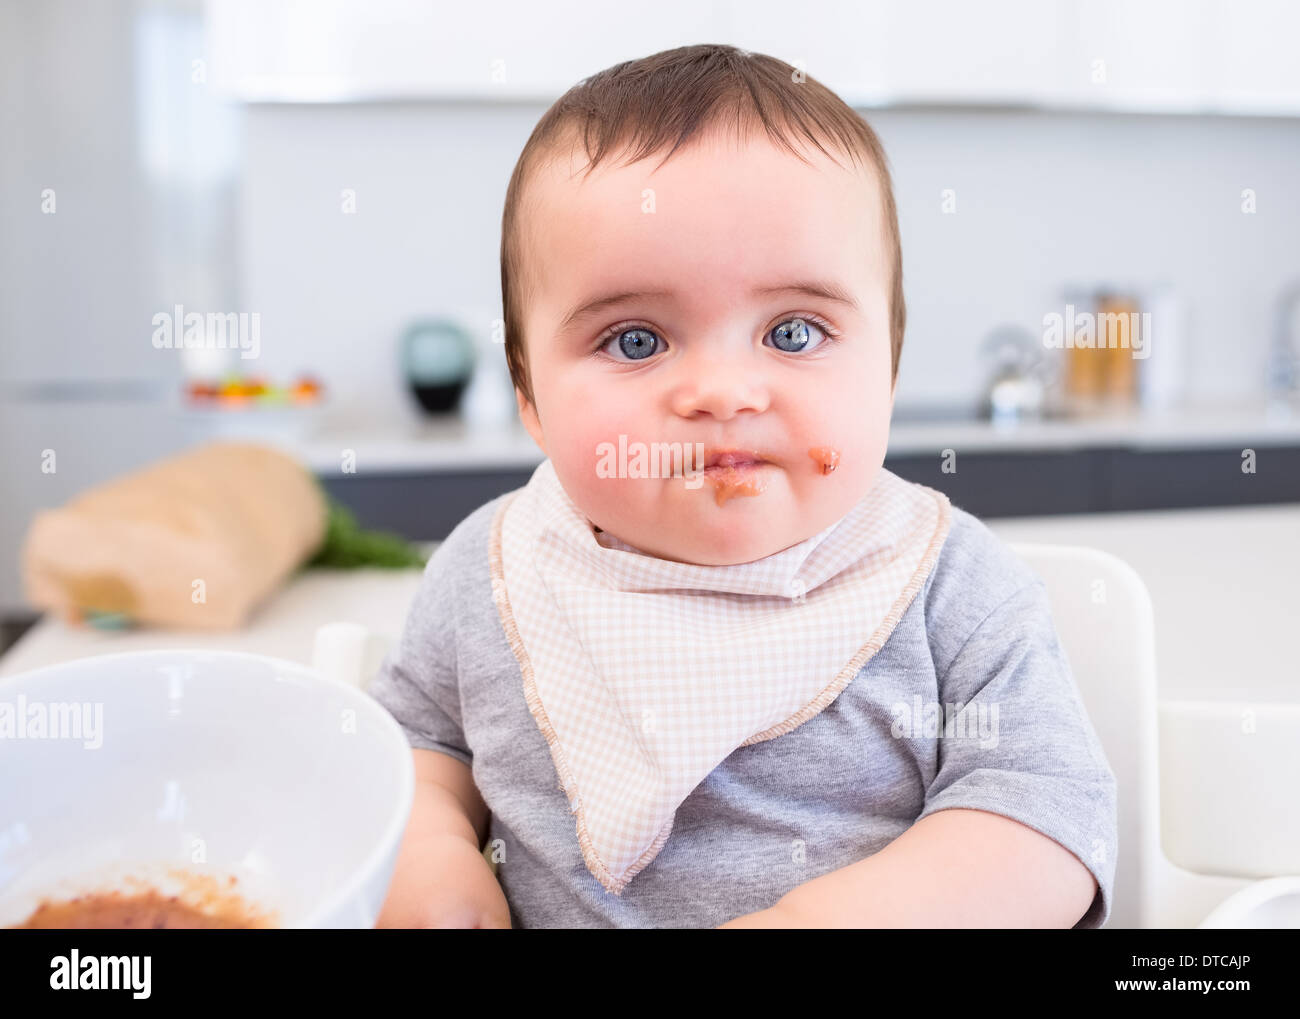 Messy baby eating food in kitchen Stock Photo